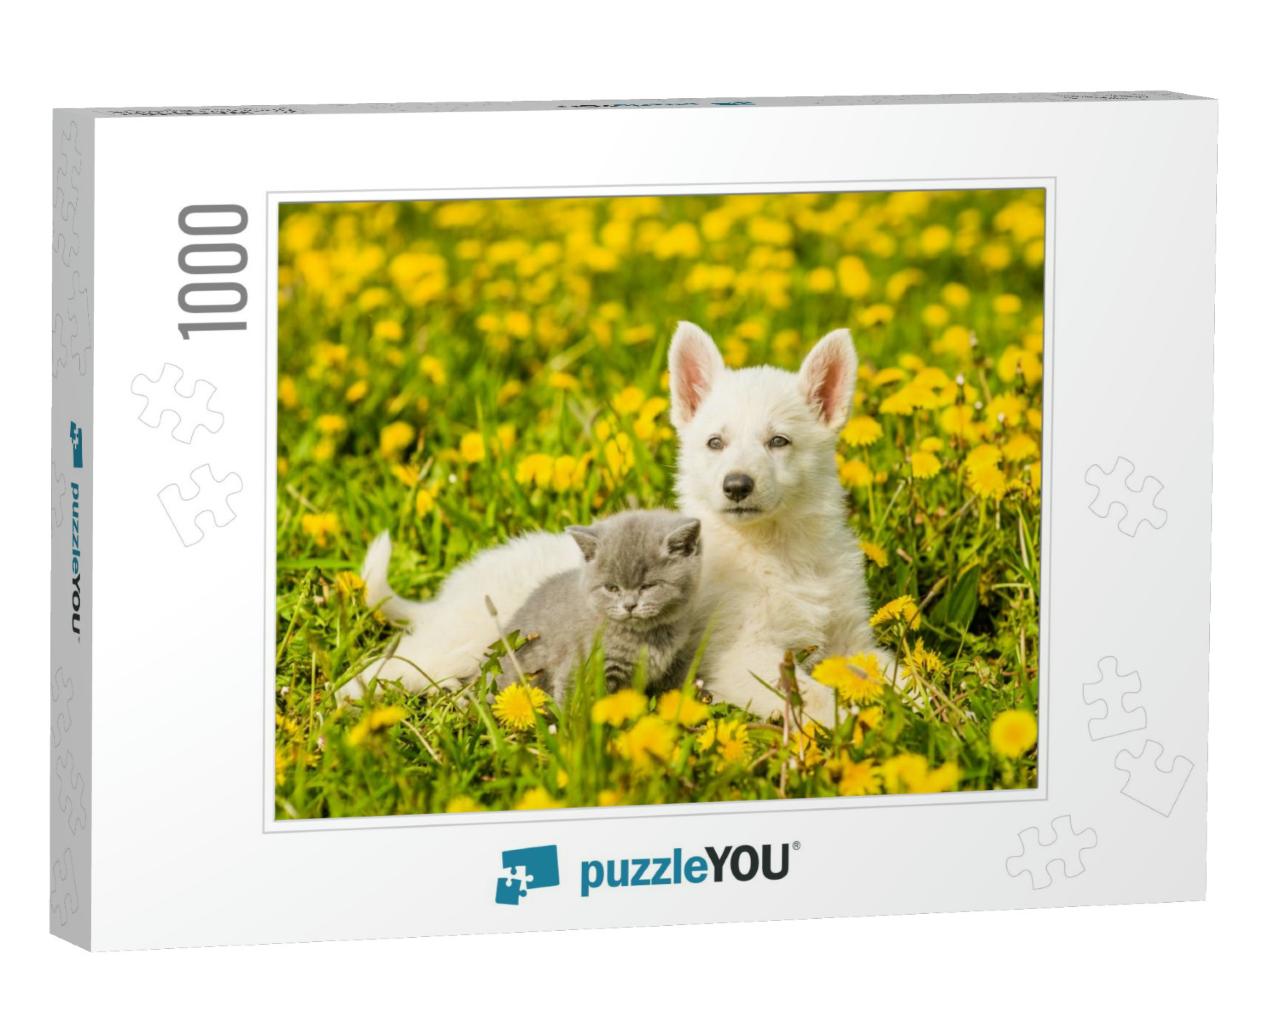 Puppy & Kitten Lying Together on a Dandelion Field... Jigsaw Puzzle with 1000 pieces